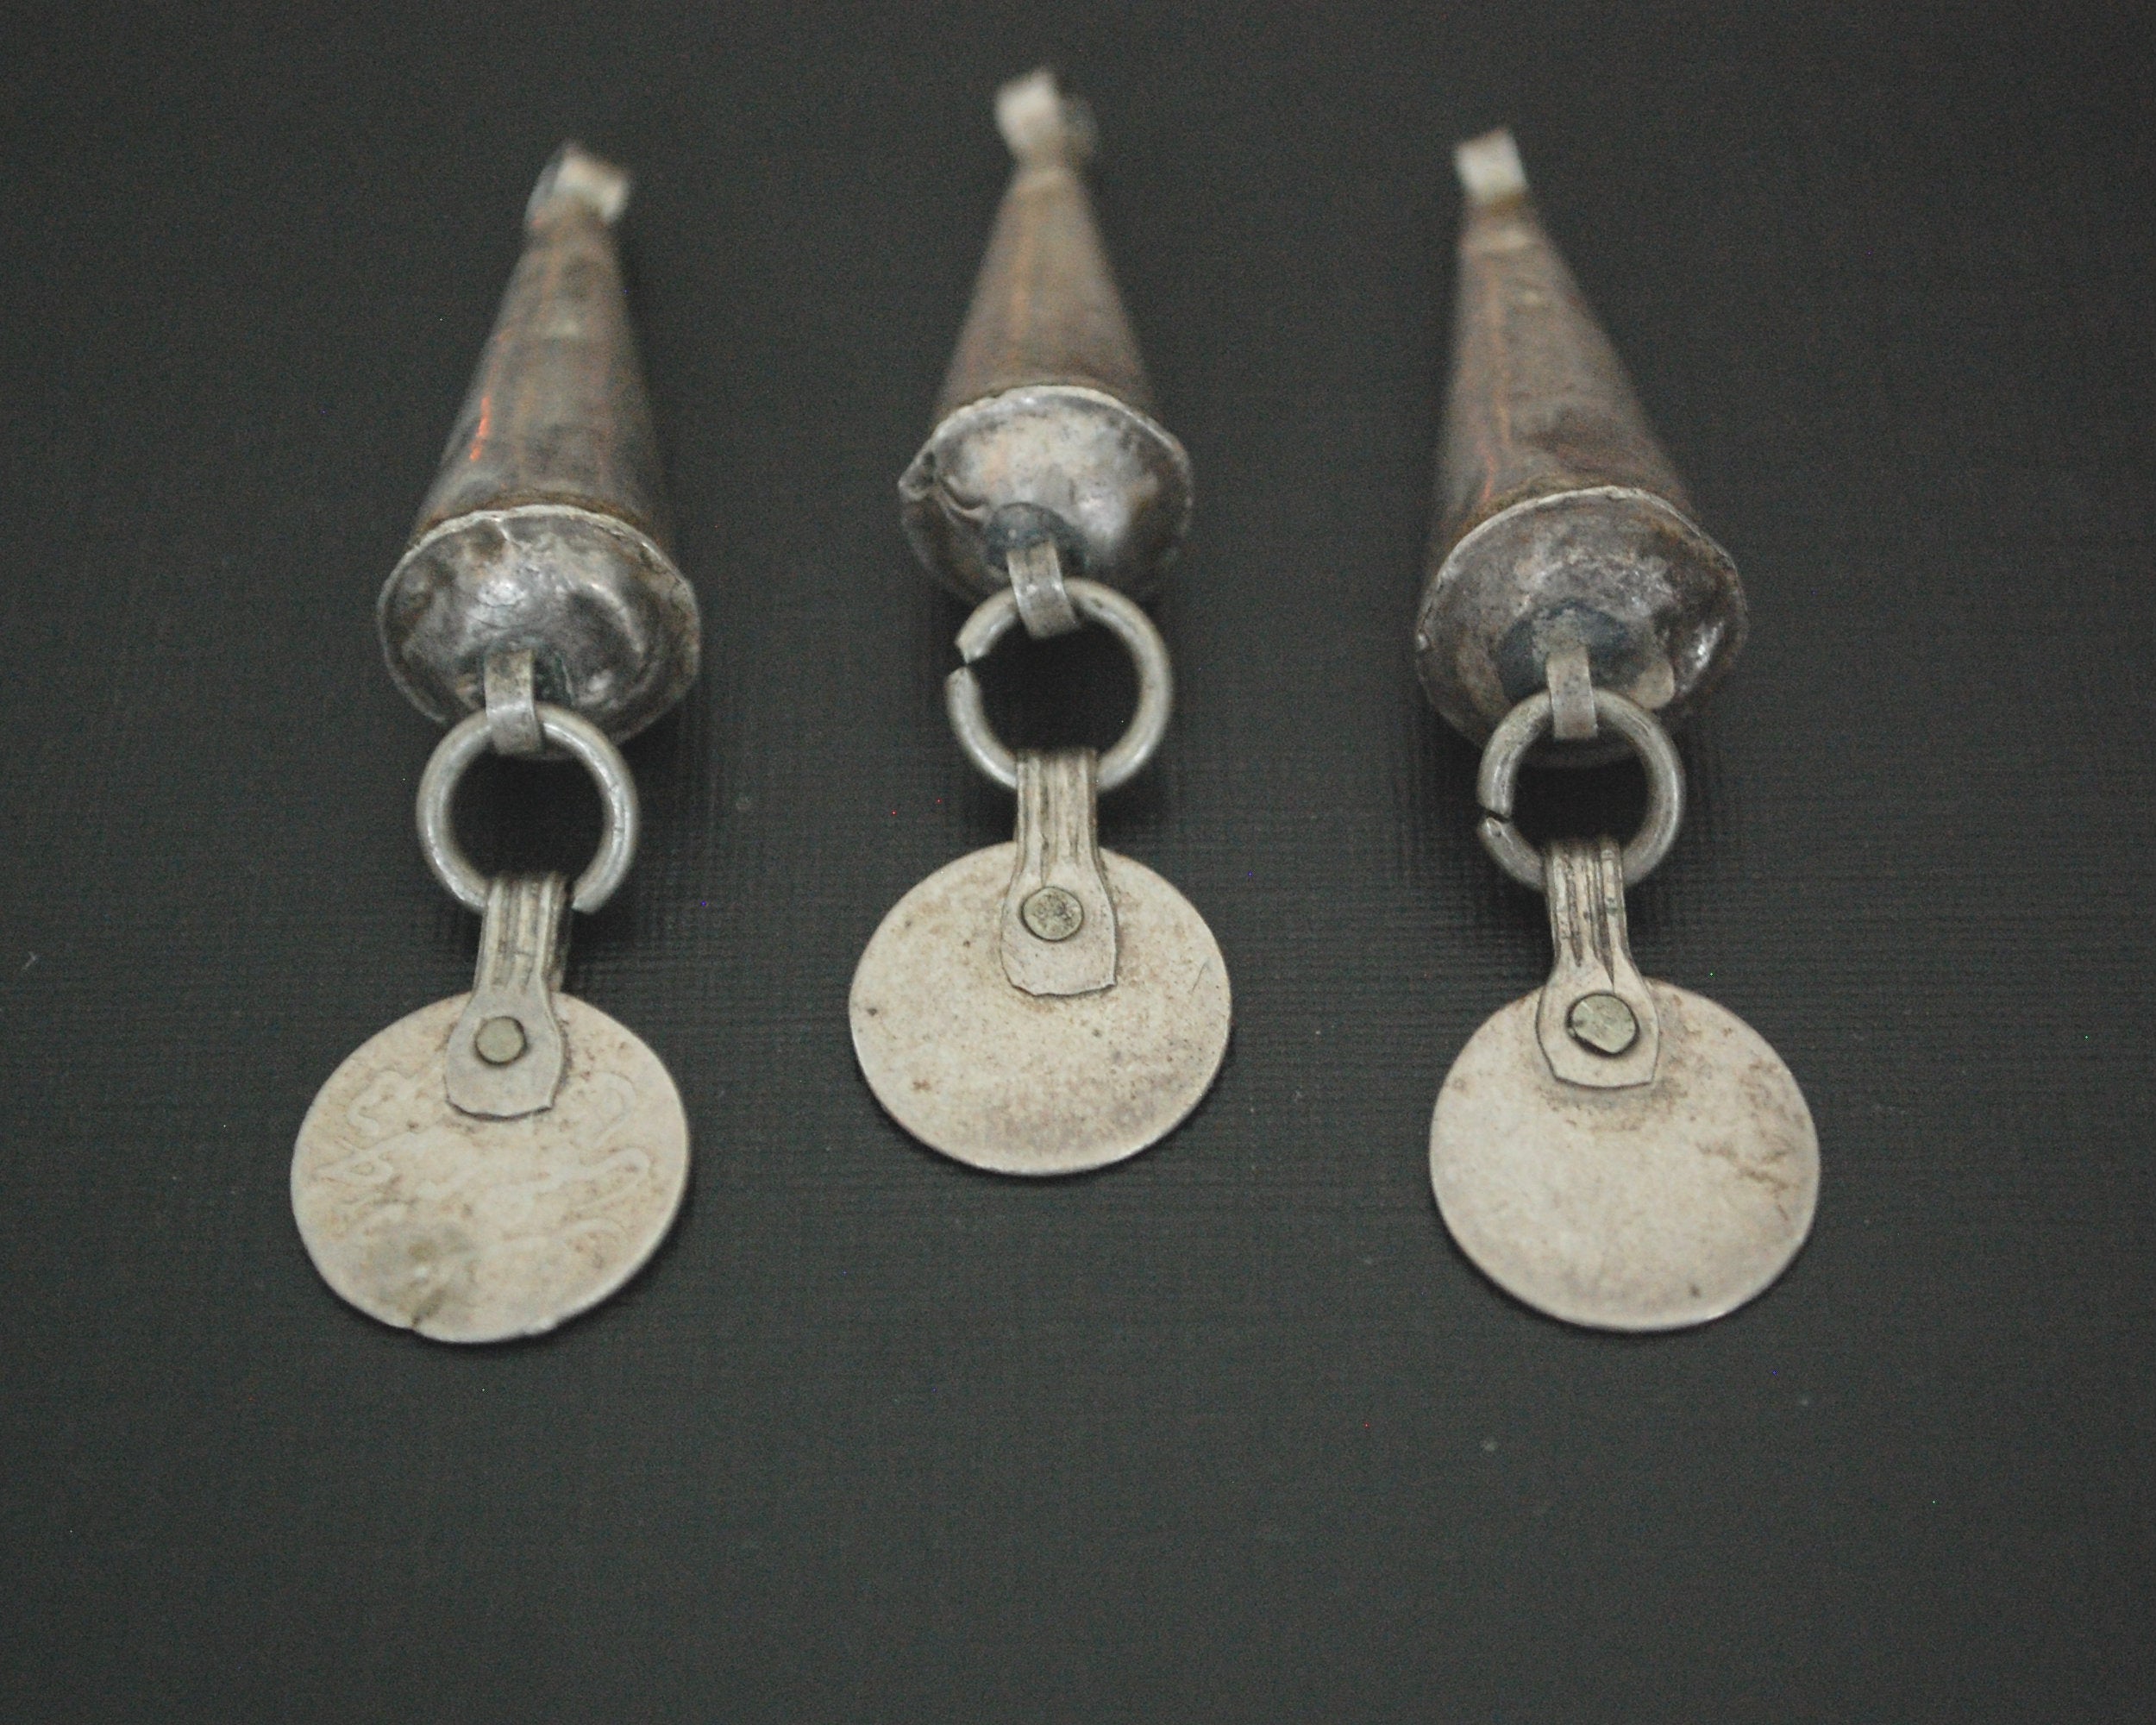 Berber Cone Pendants with Dangling Coin